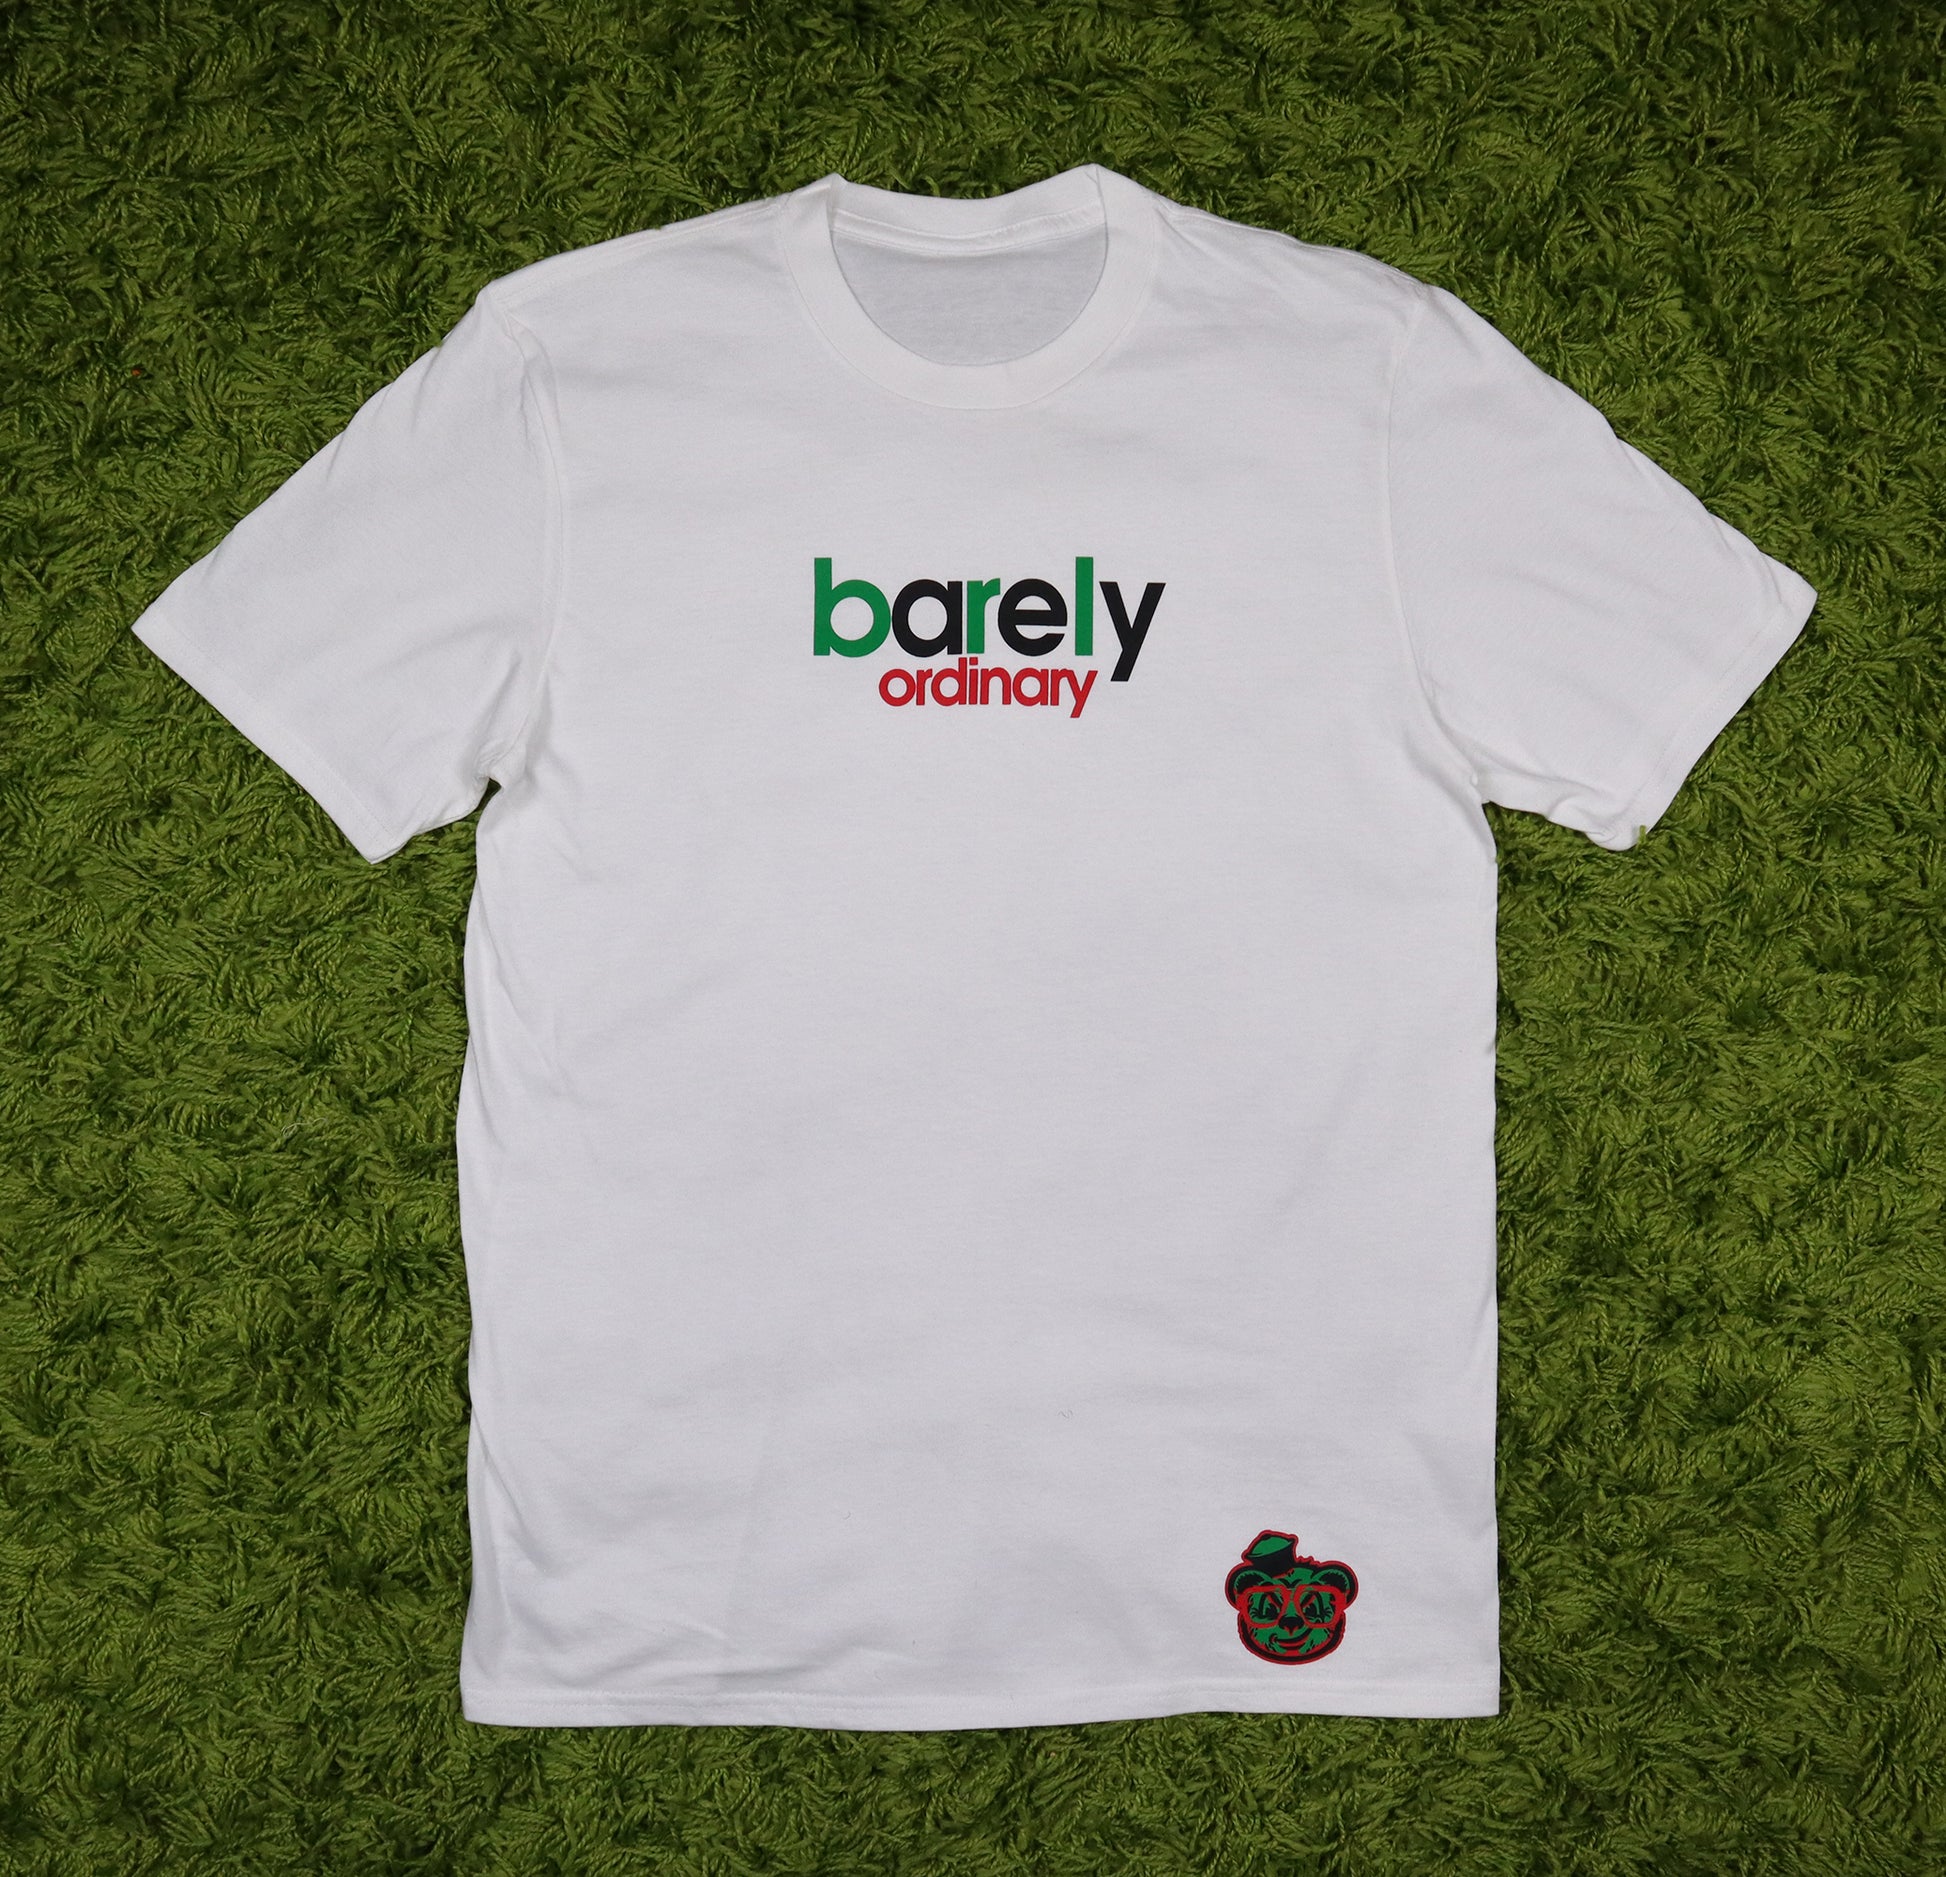 Barely "Stamped" Logo Tee (Wht/Red/Blk/Grn) - Barely Ordinary